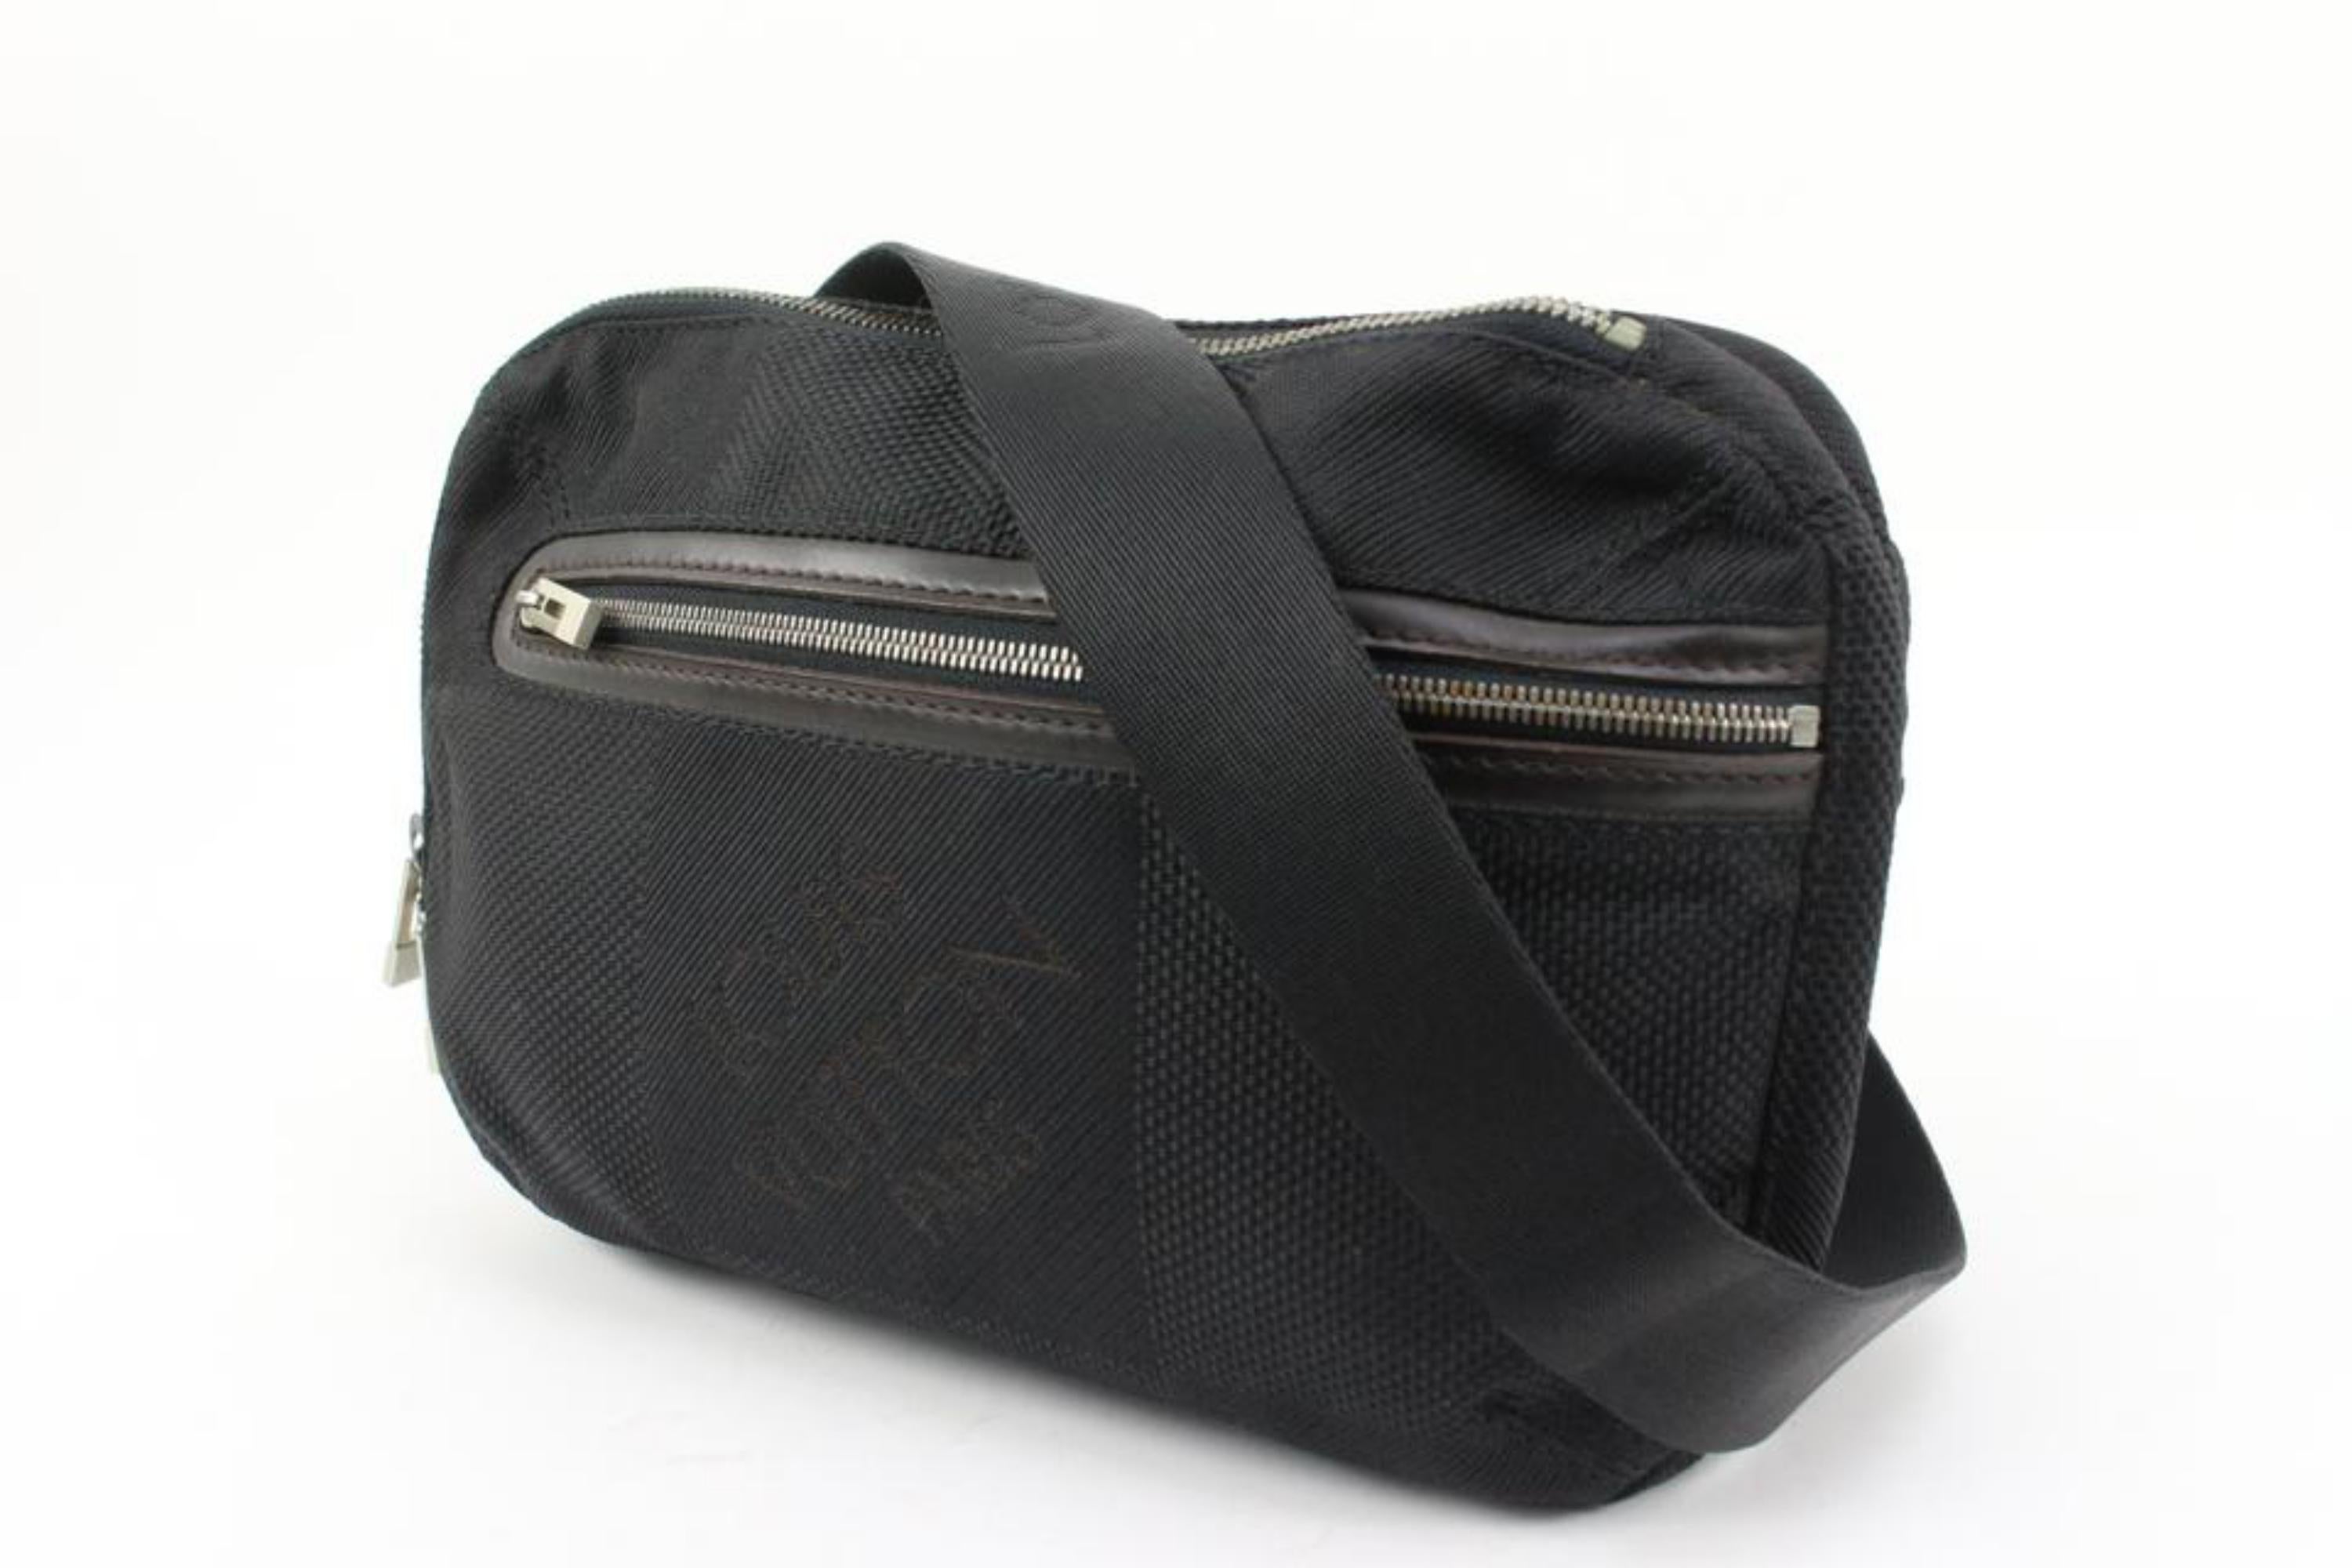 Louis Vuitton Black Damier Geant Arche Bumbag Waist Pouch 71lk39s
Date Code/Serial Number: AR1006
Made In: France
Measurements: Length:  10.5